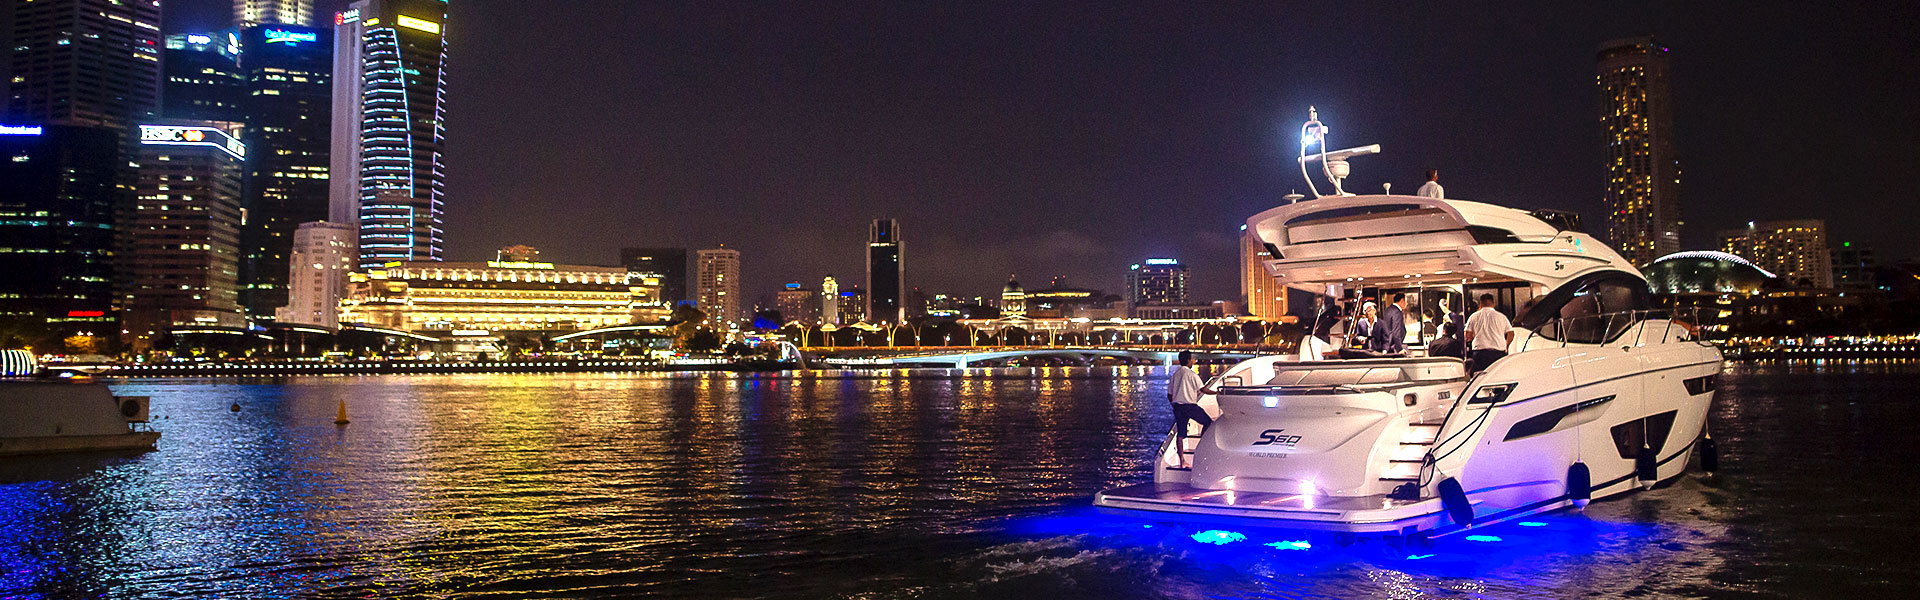 On-Water World Premiere of Princess S60 at Louis Vuitton Jetty, Marina Bay  - Boat Lagoon Yachting